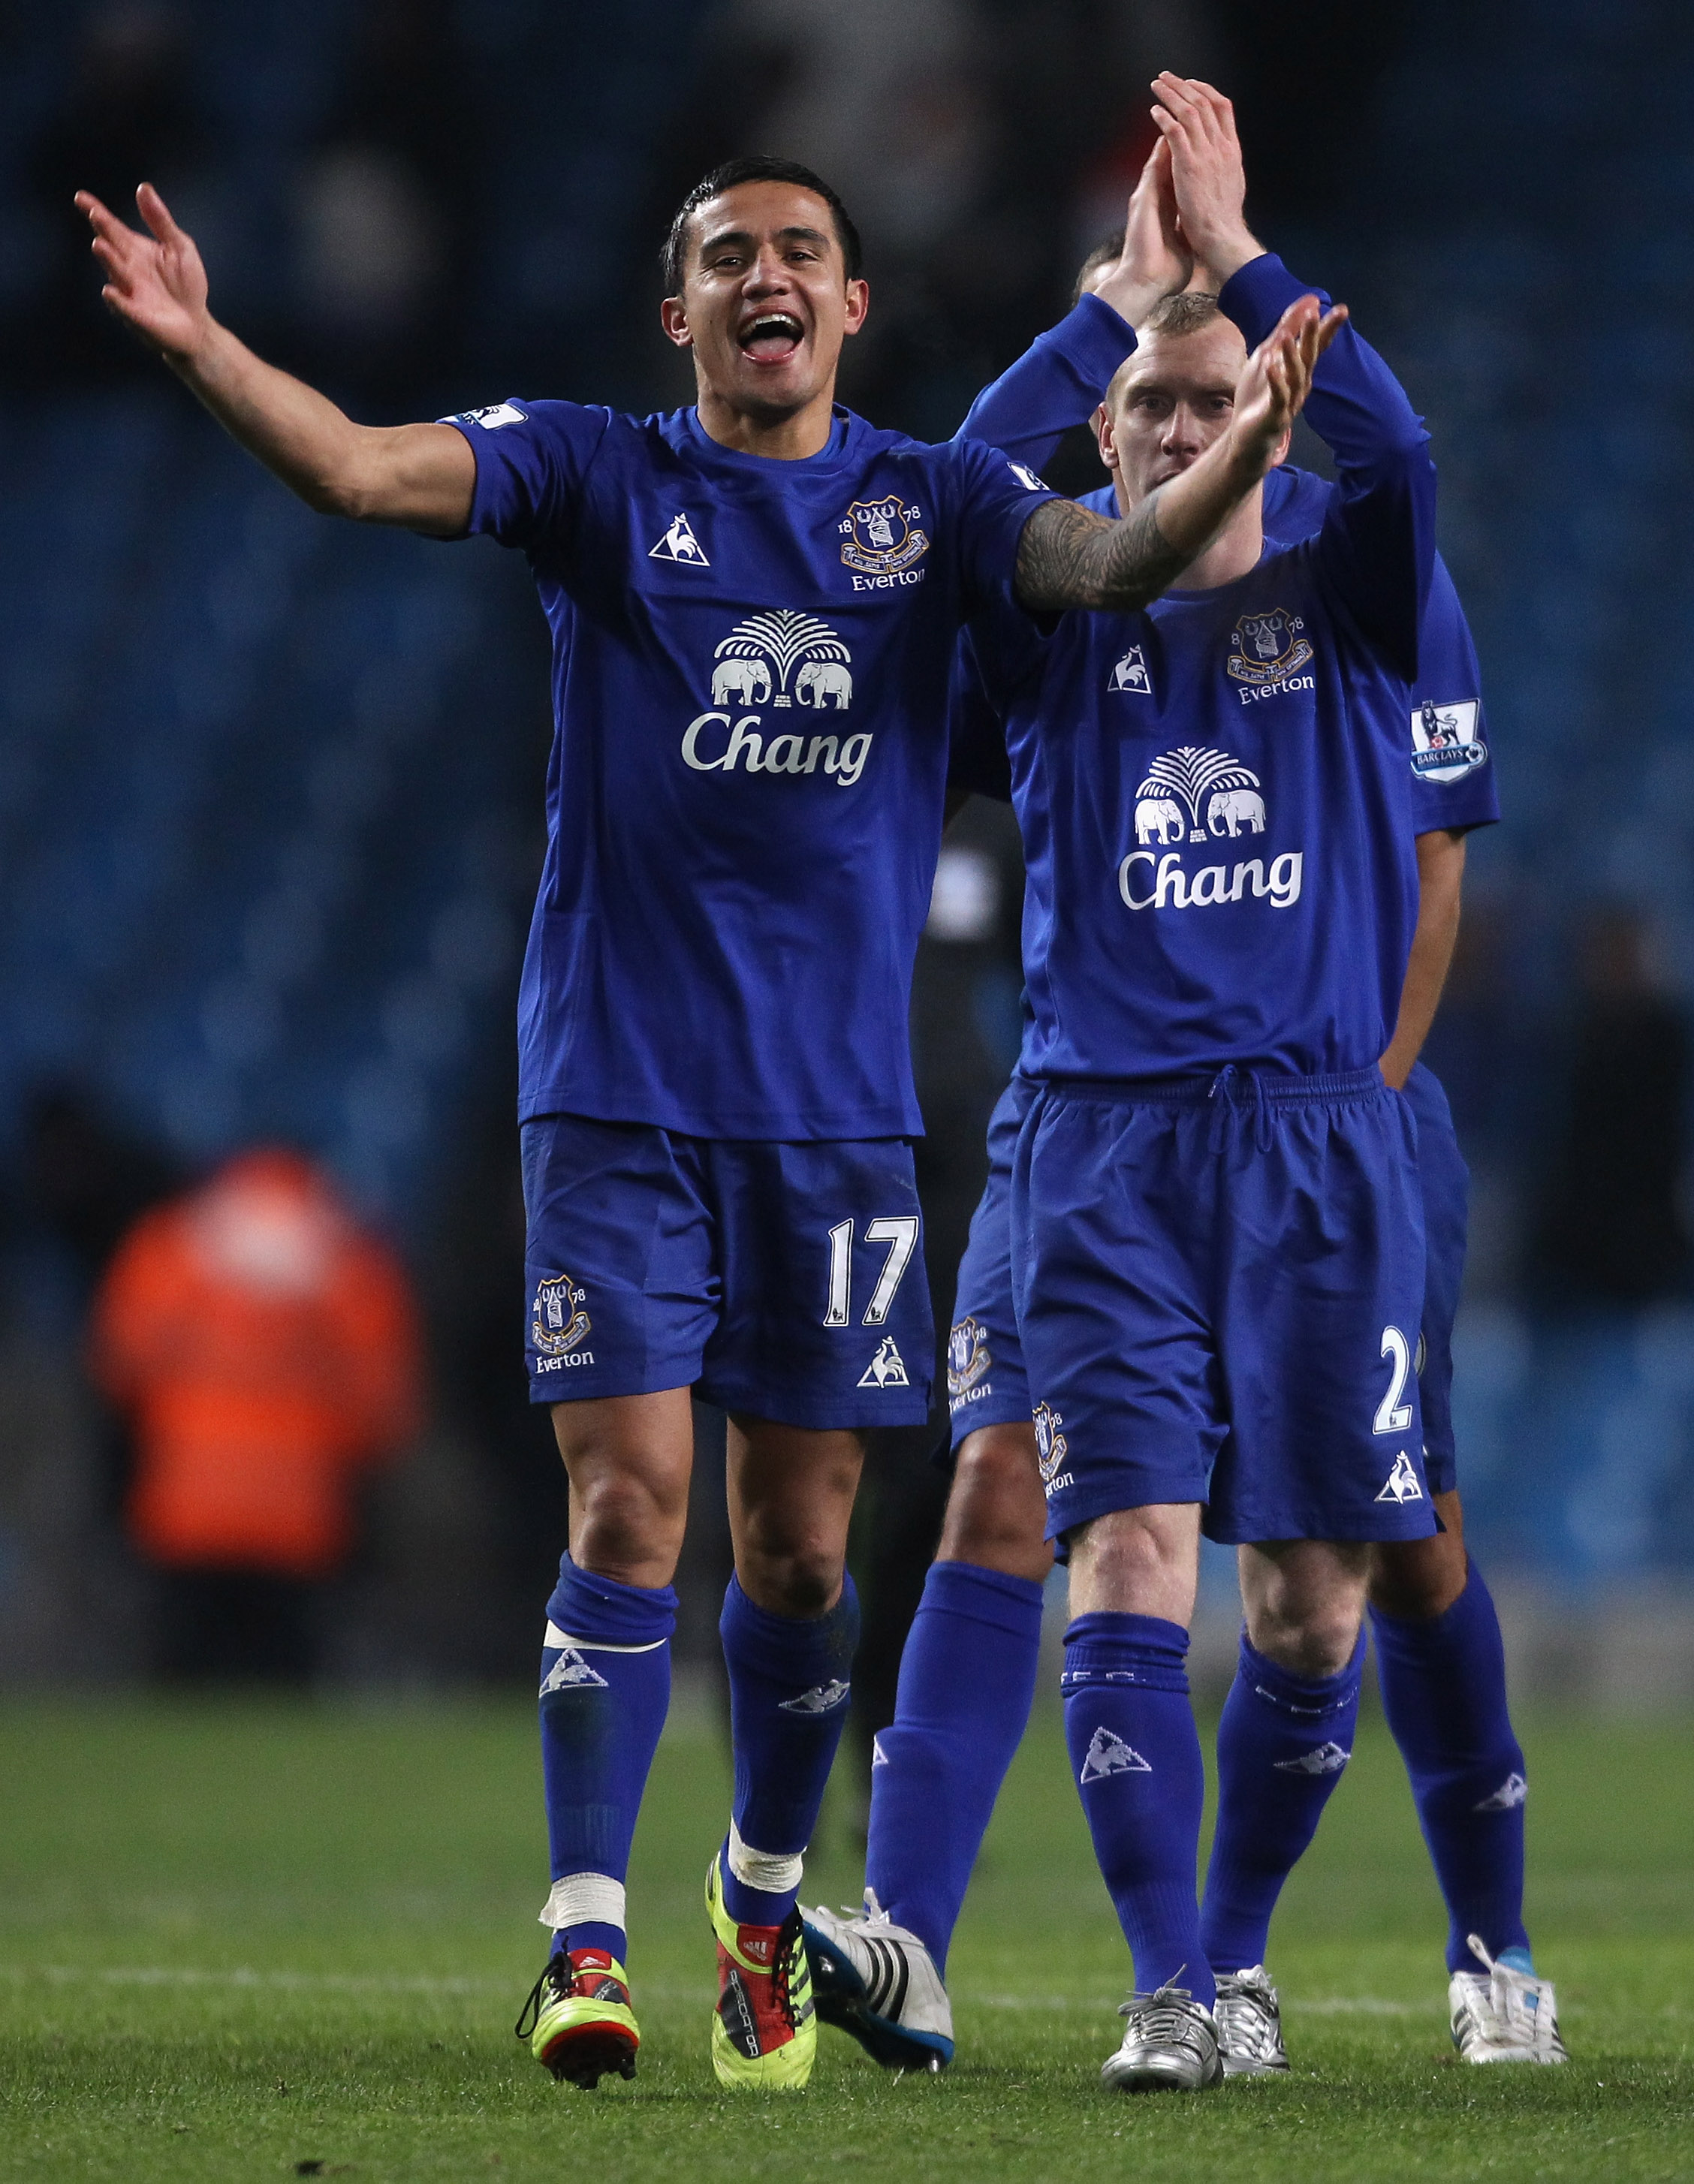 MANCHESTER, ENGLAND - DECEMBER 20:  Tim Cahill of Everton celebrates after victory over Manchester City in the Barclays Premier League match between Manchester City and Everton at City of Manchester Stadium on December 20, 2010 in Manchester, England.  (P